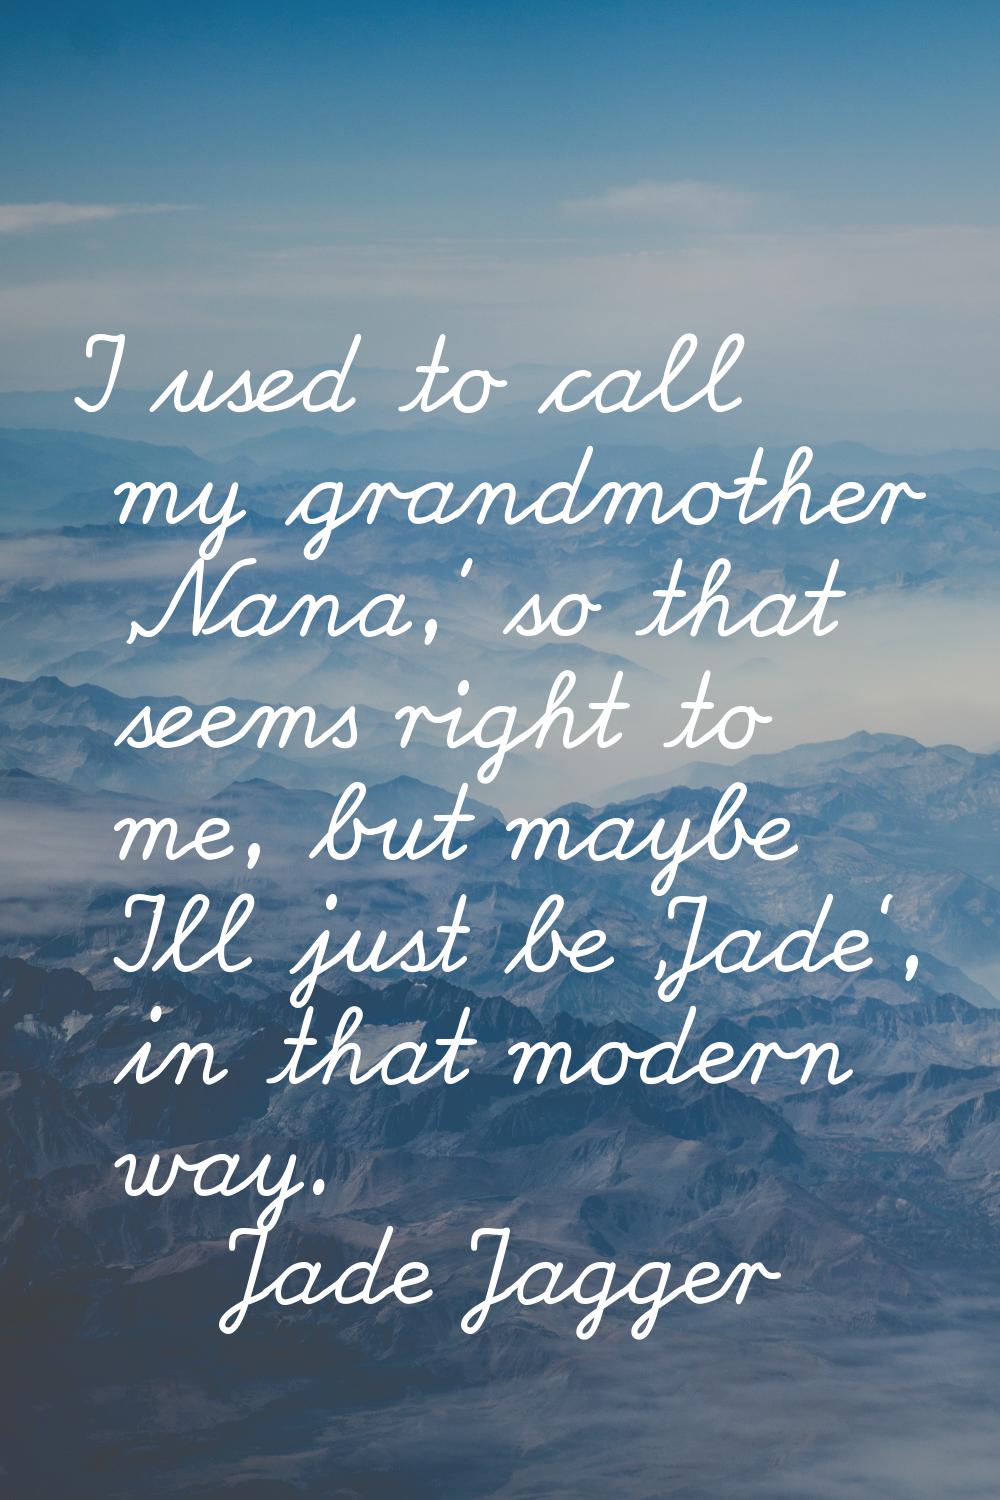 I used to call my grandmother 'Nana,' so that seems right to me, but maybe I'll just be 'Jade', in 